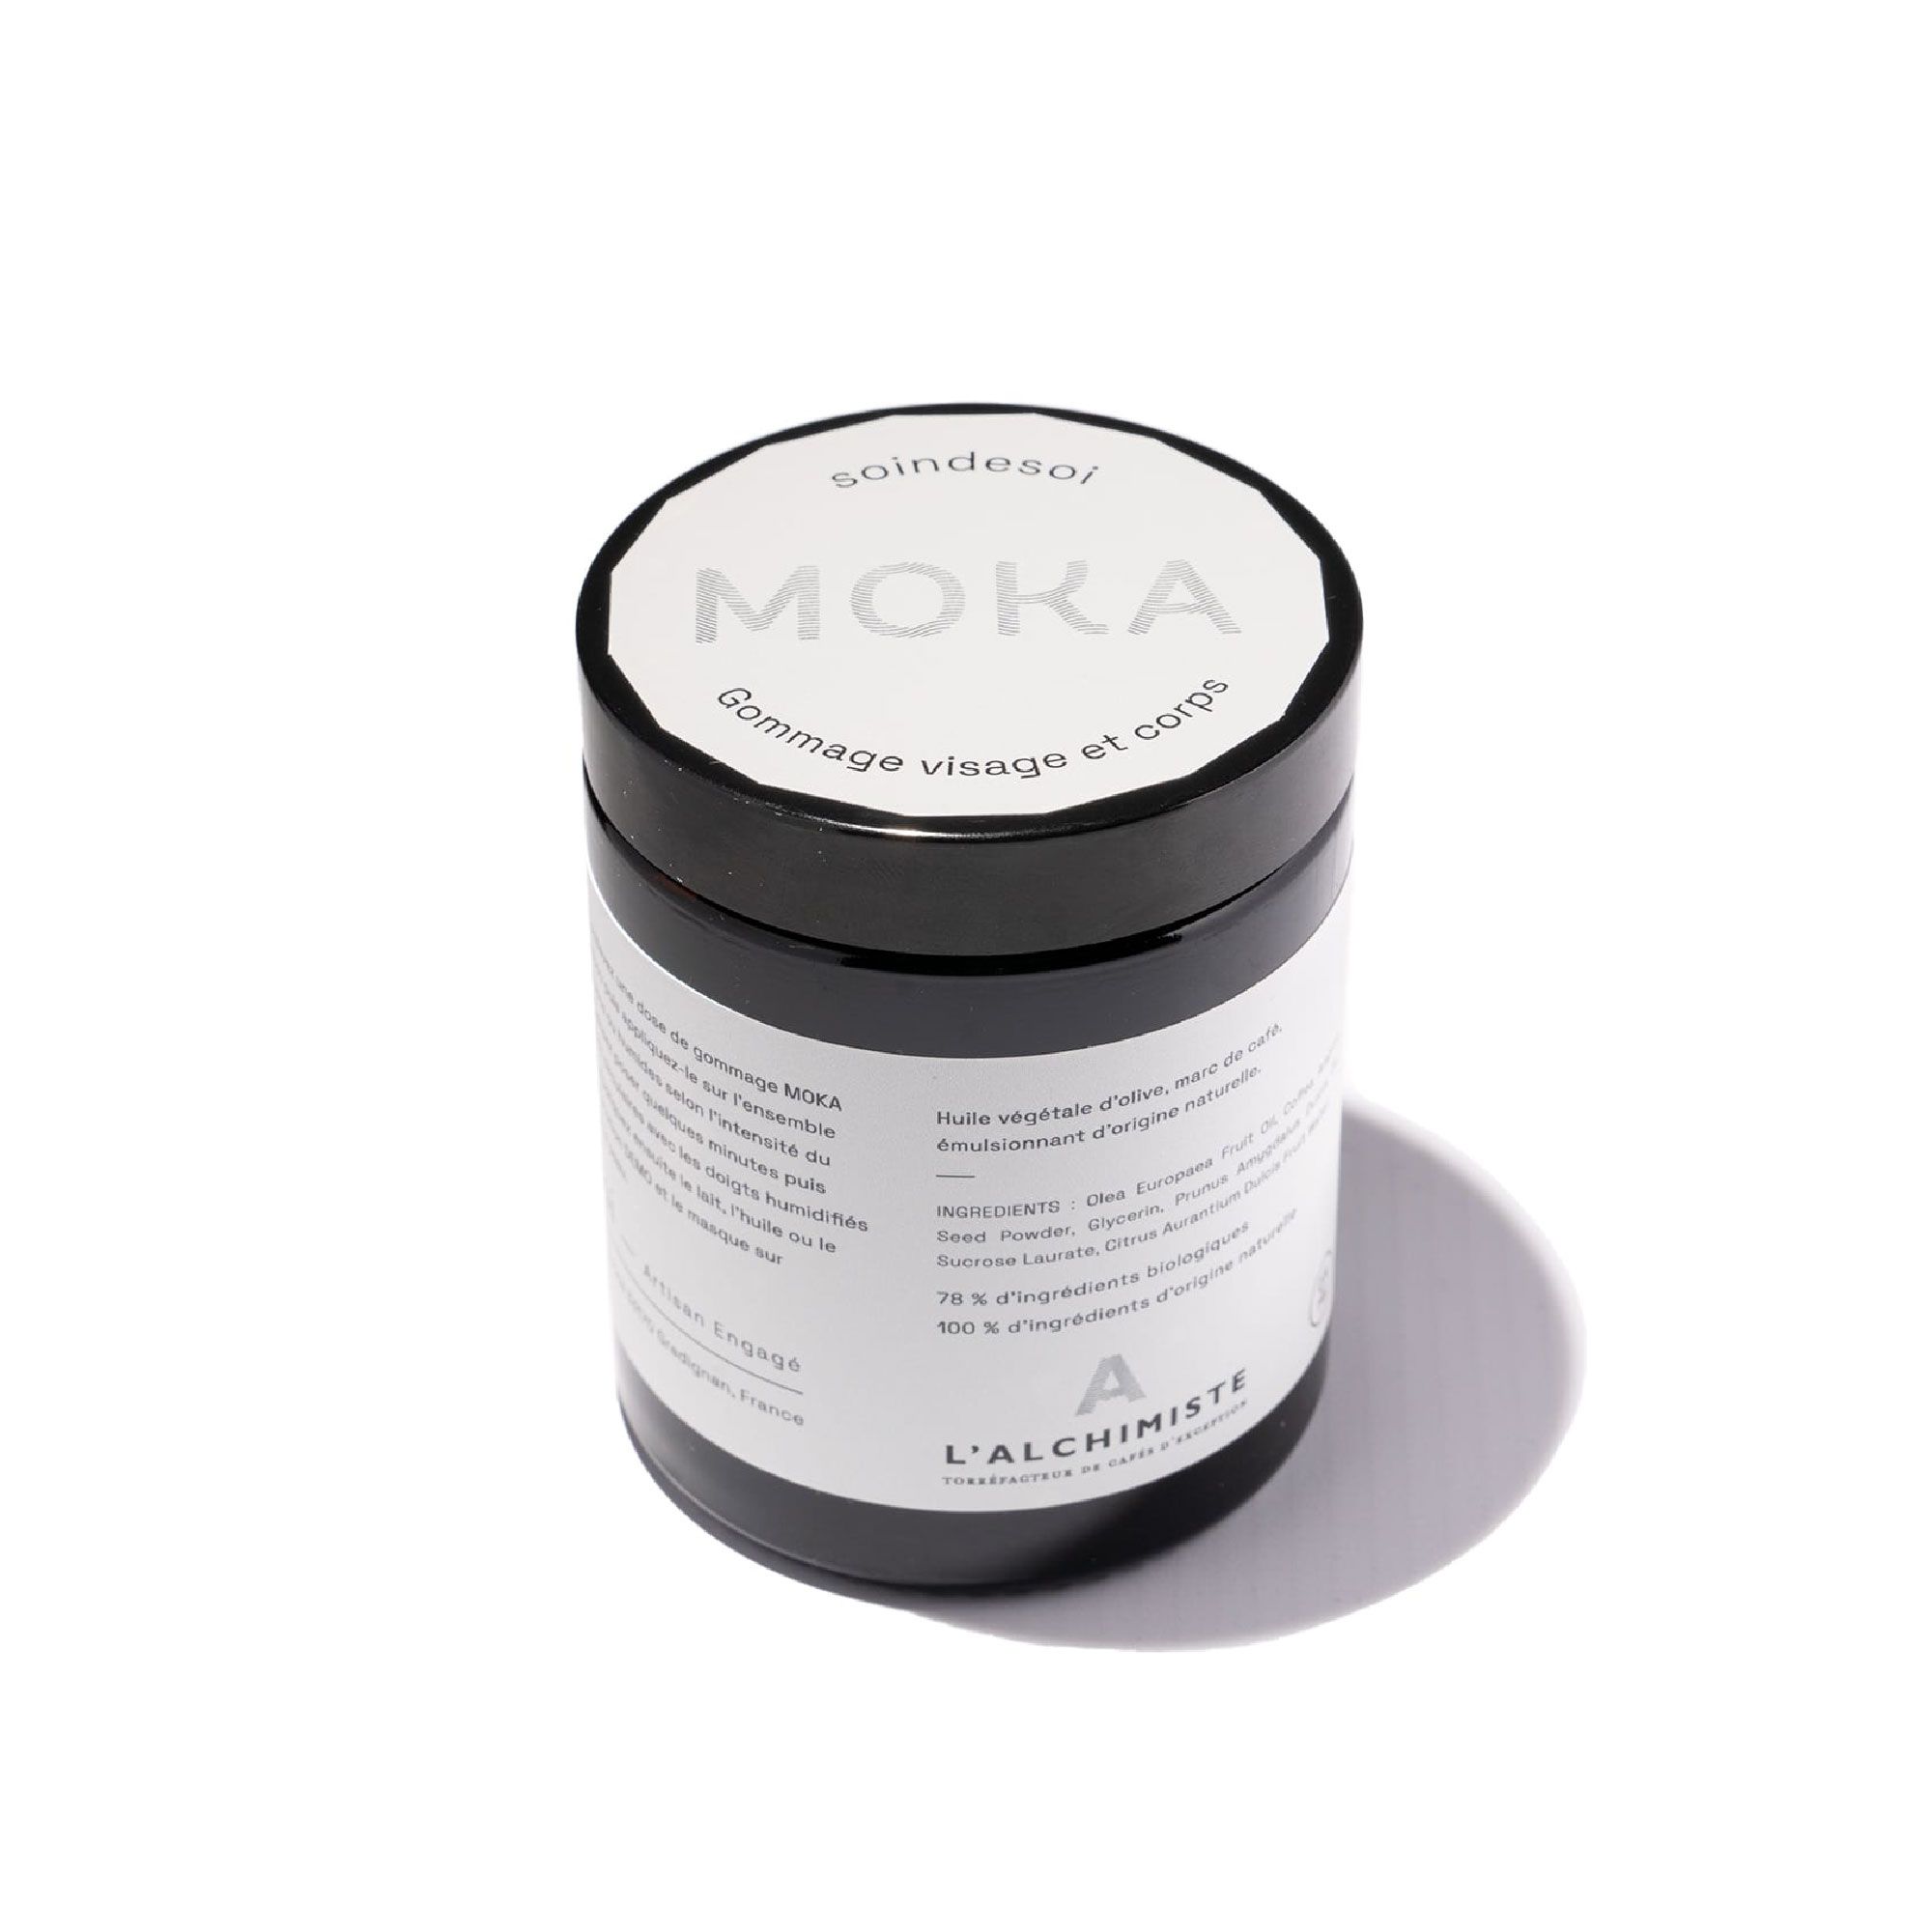 Product Video Placeholder: MOKA face and body scrub - 180 ml